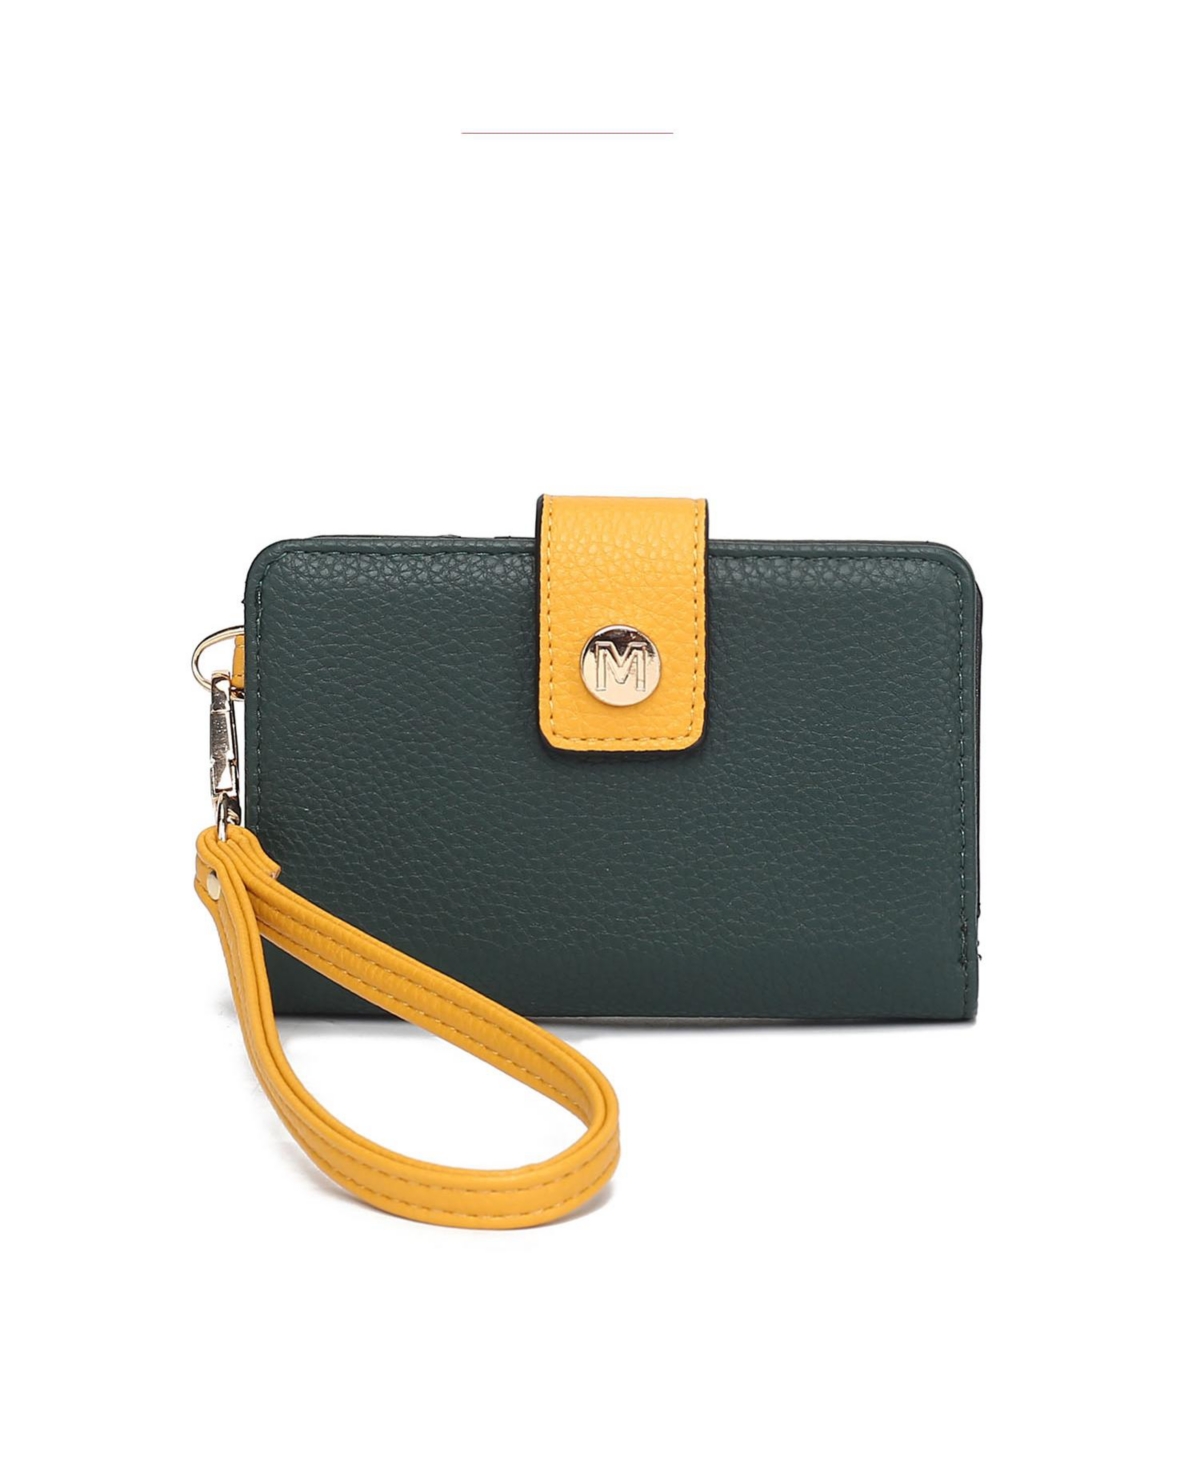 Shira Color Block Women's Wallet with wristlet by Mia K - Taupe